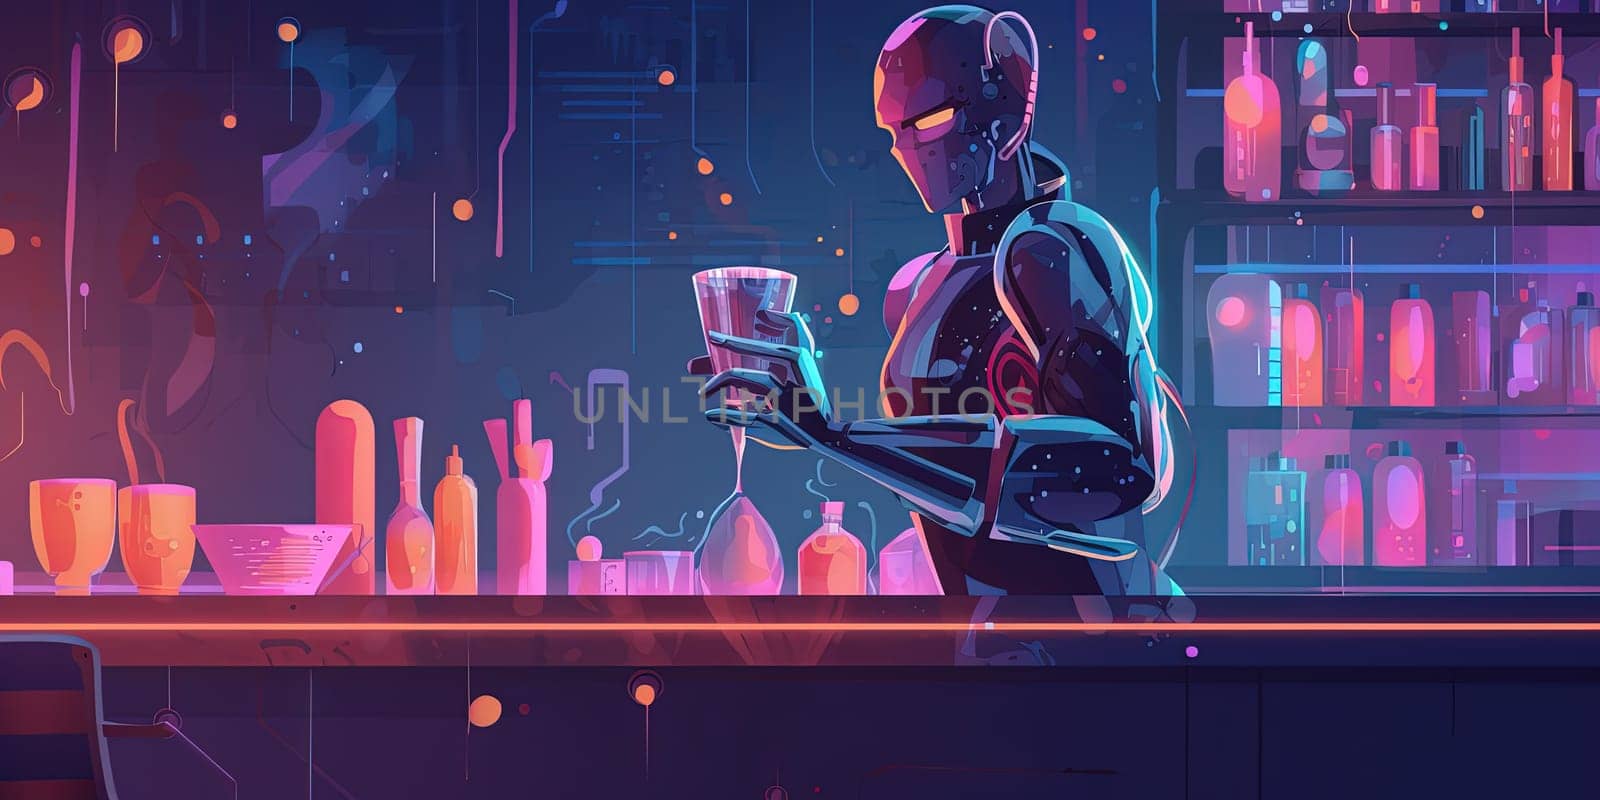 Android Robot Working Behind Bar Counter In Night Club